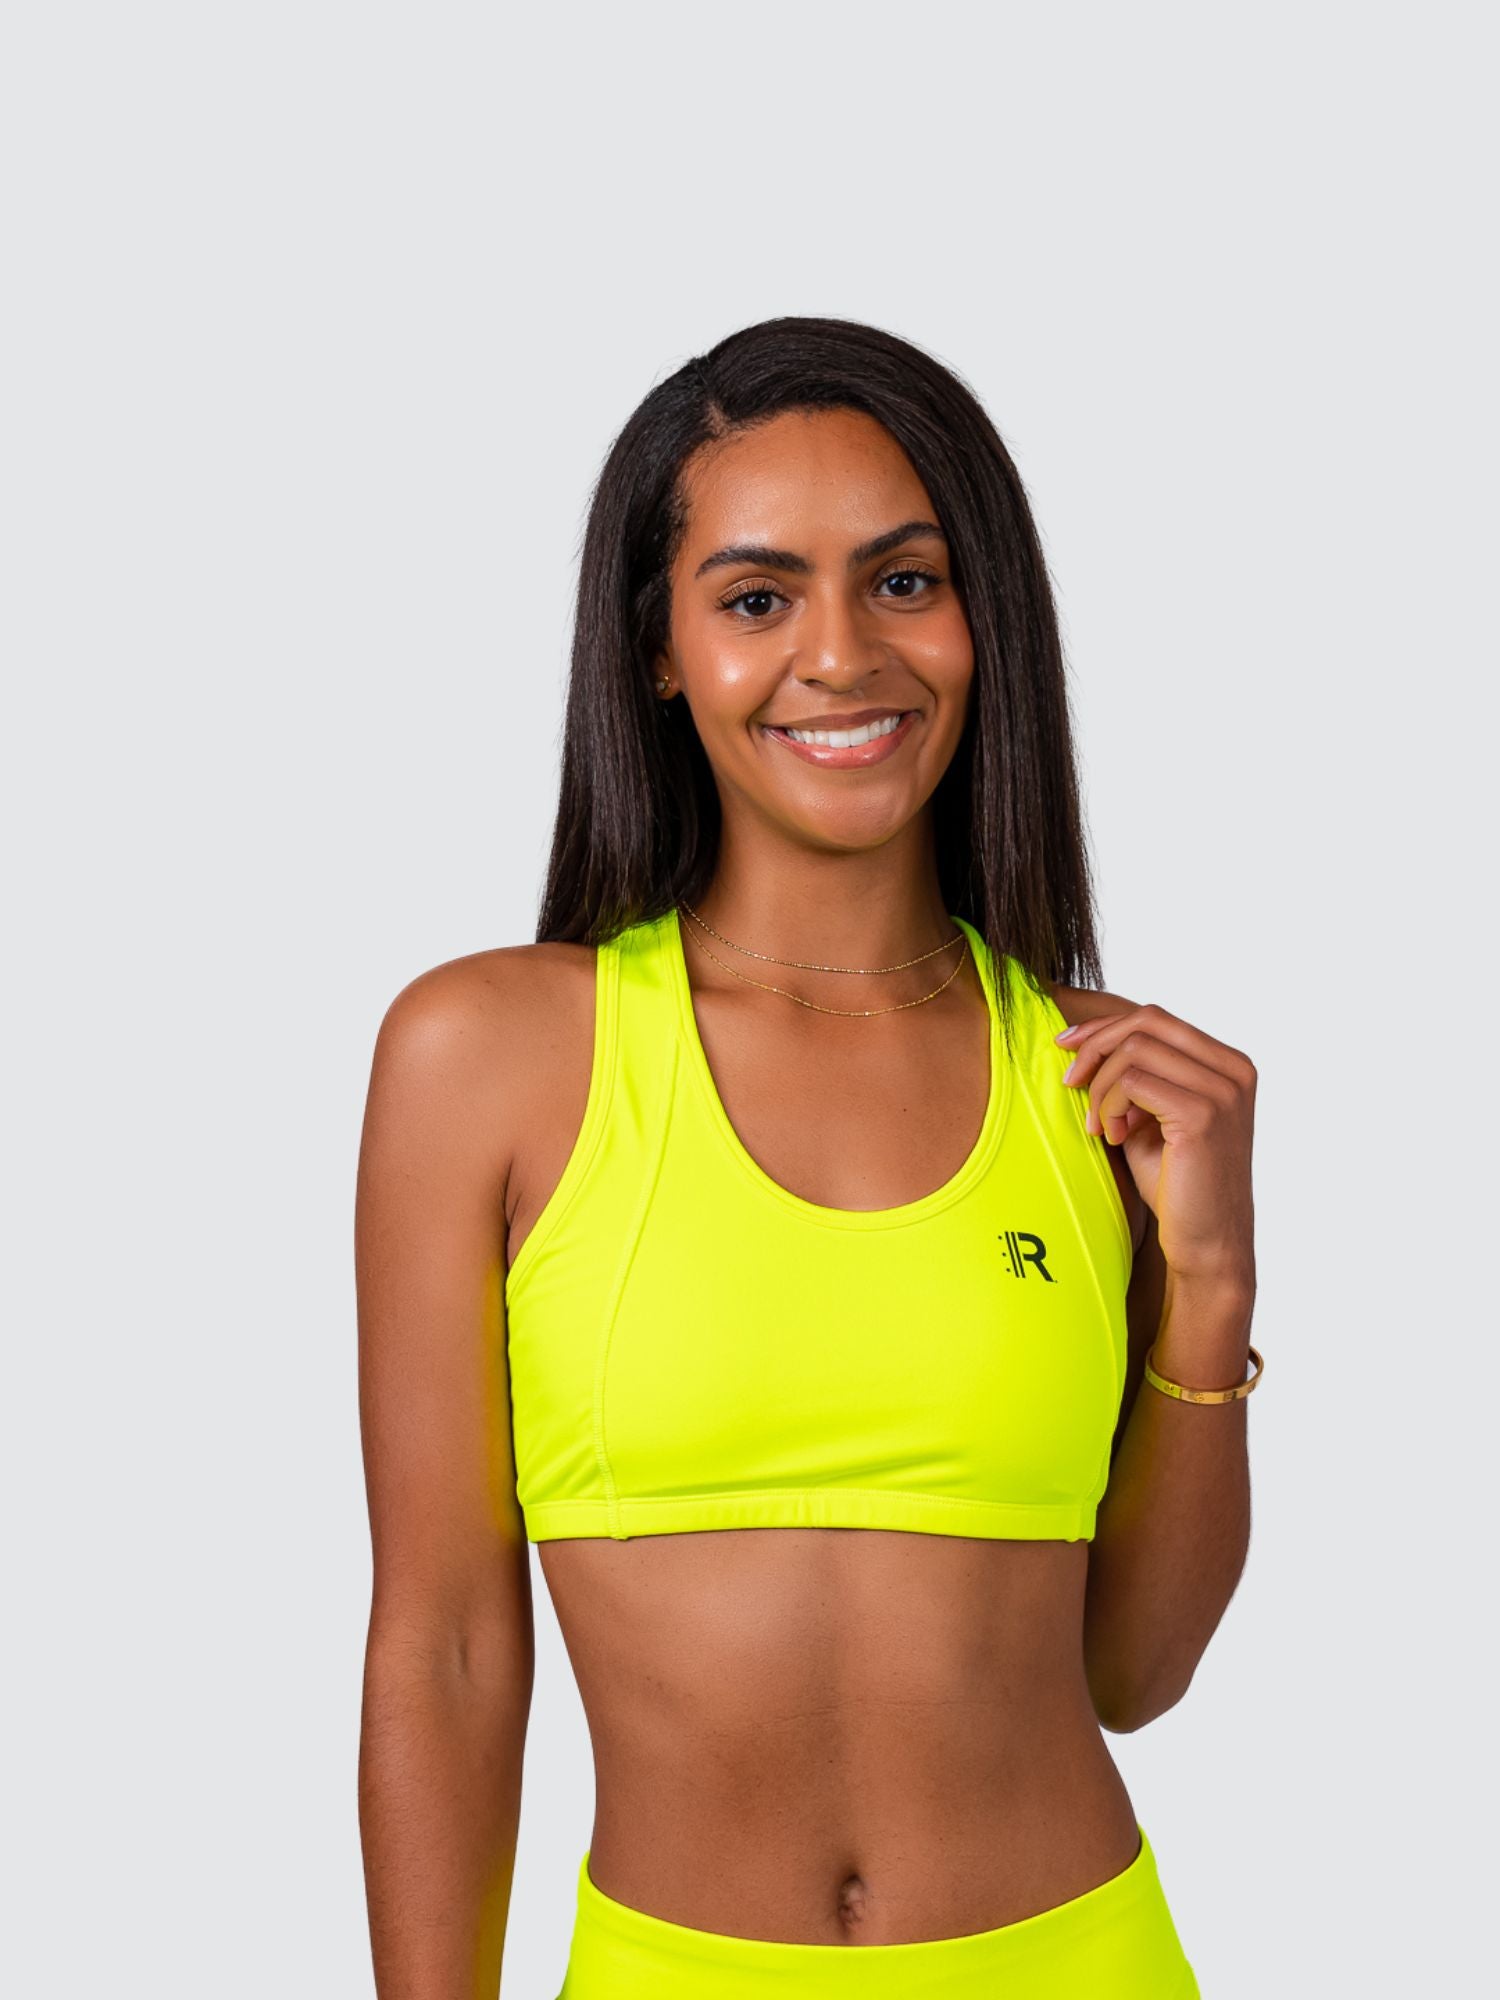 Neon Yellow Sports Bra with Ribbon Band Isolated on White Background Stock  Image - Image of bright, background: 99934493